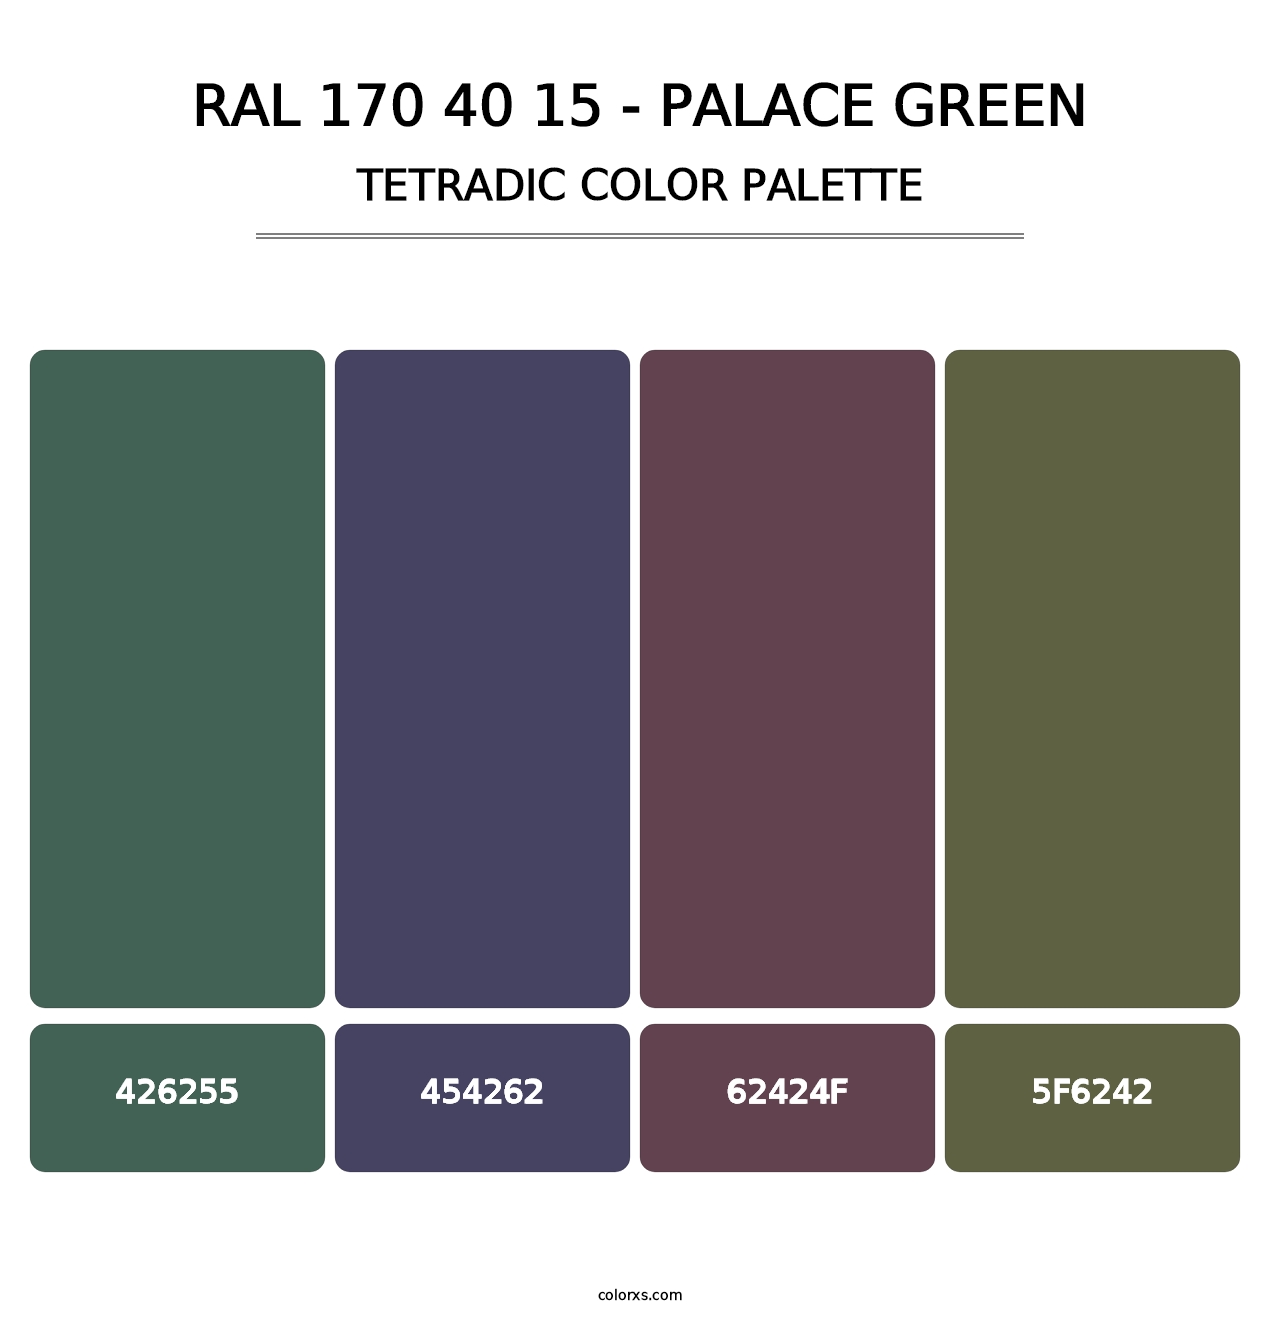 RAL 170 40 15 - Palace Green - Tetradic Color Palette